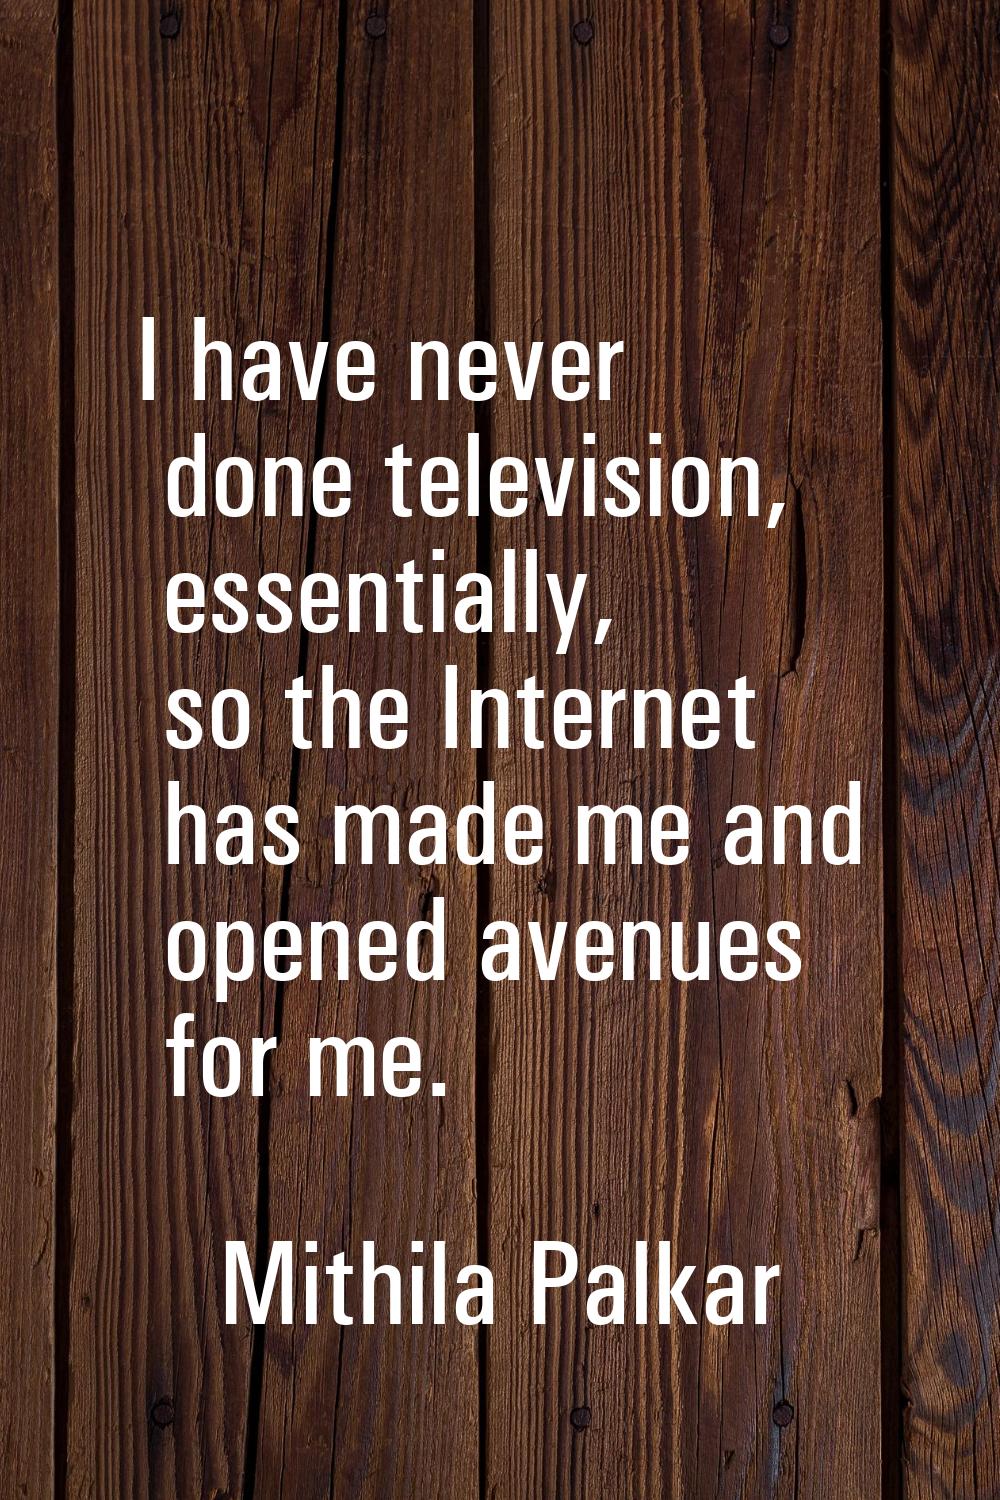 I have never done television, essentially, so the Internet has made me and opened avenues for me.